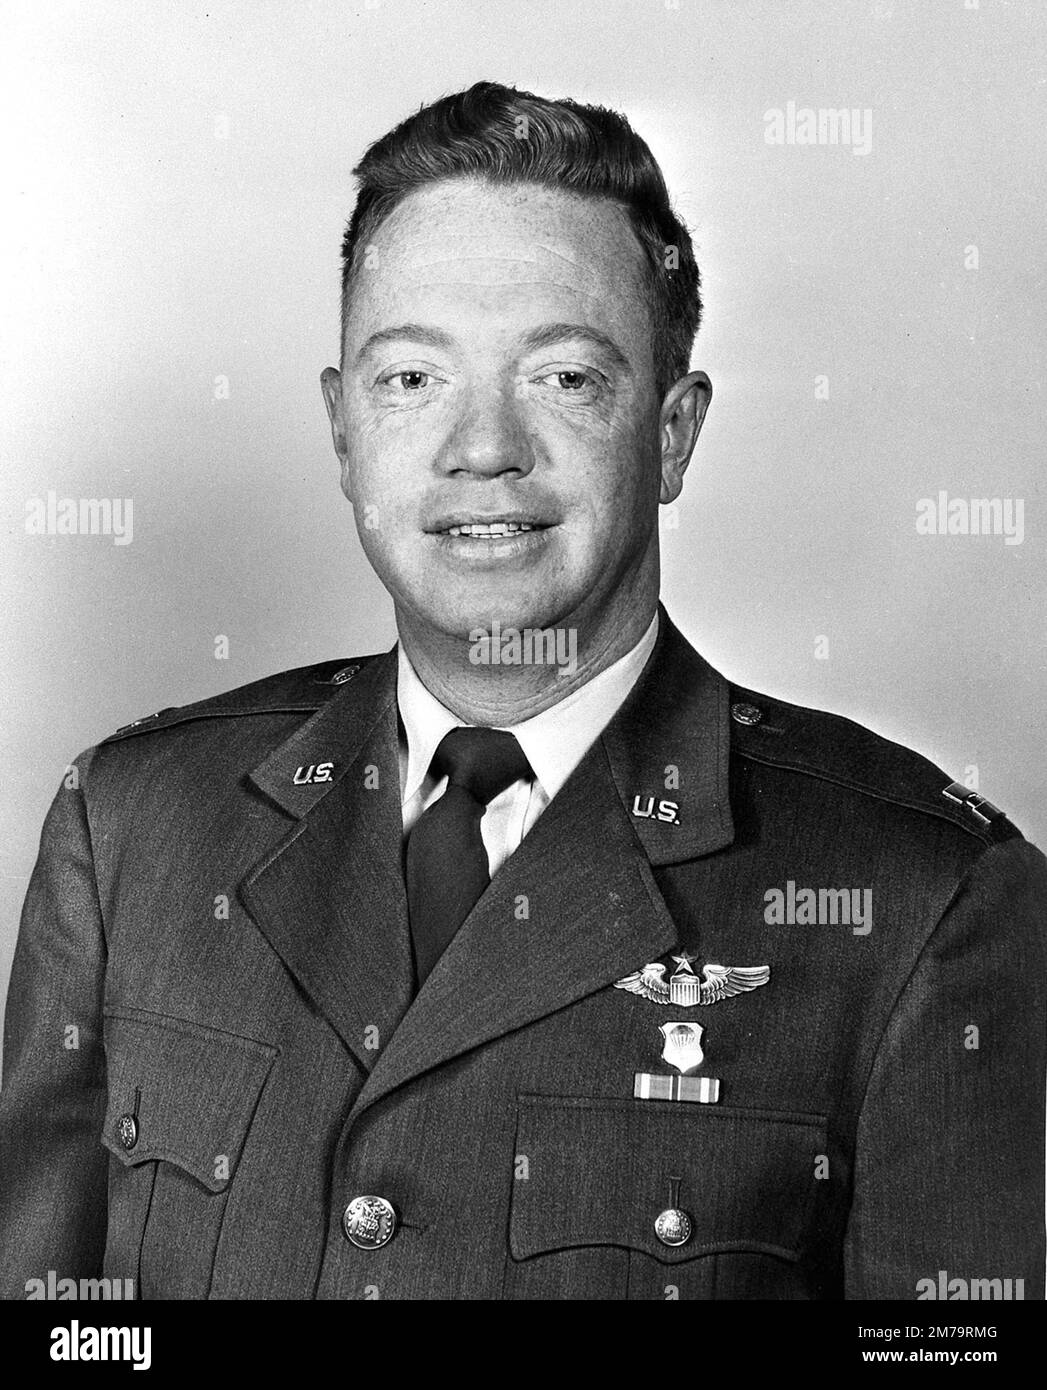 Joseph William Kittinger II (1928 – 2022) served as a United States Air Force (USAF) officer from 1950 to 1978. He held the world record for the highest skydive—102,800 feet (31.3 km)—from 1960 until 2012. He participated in the Project Manhigh and Project Excelsior high-altitude balloon flight projects from 1956 to 1960 and was the first man to fully witness the curvature of the Earth. Col. Joseph Kittinger Jr. (U.S. Air Force photo) Stock Photo